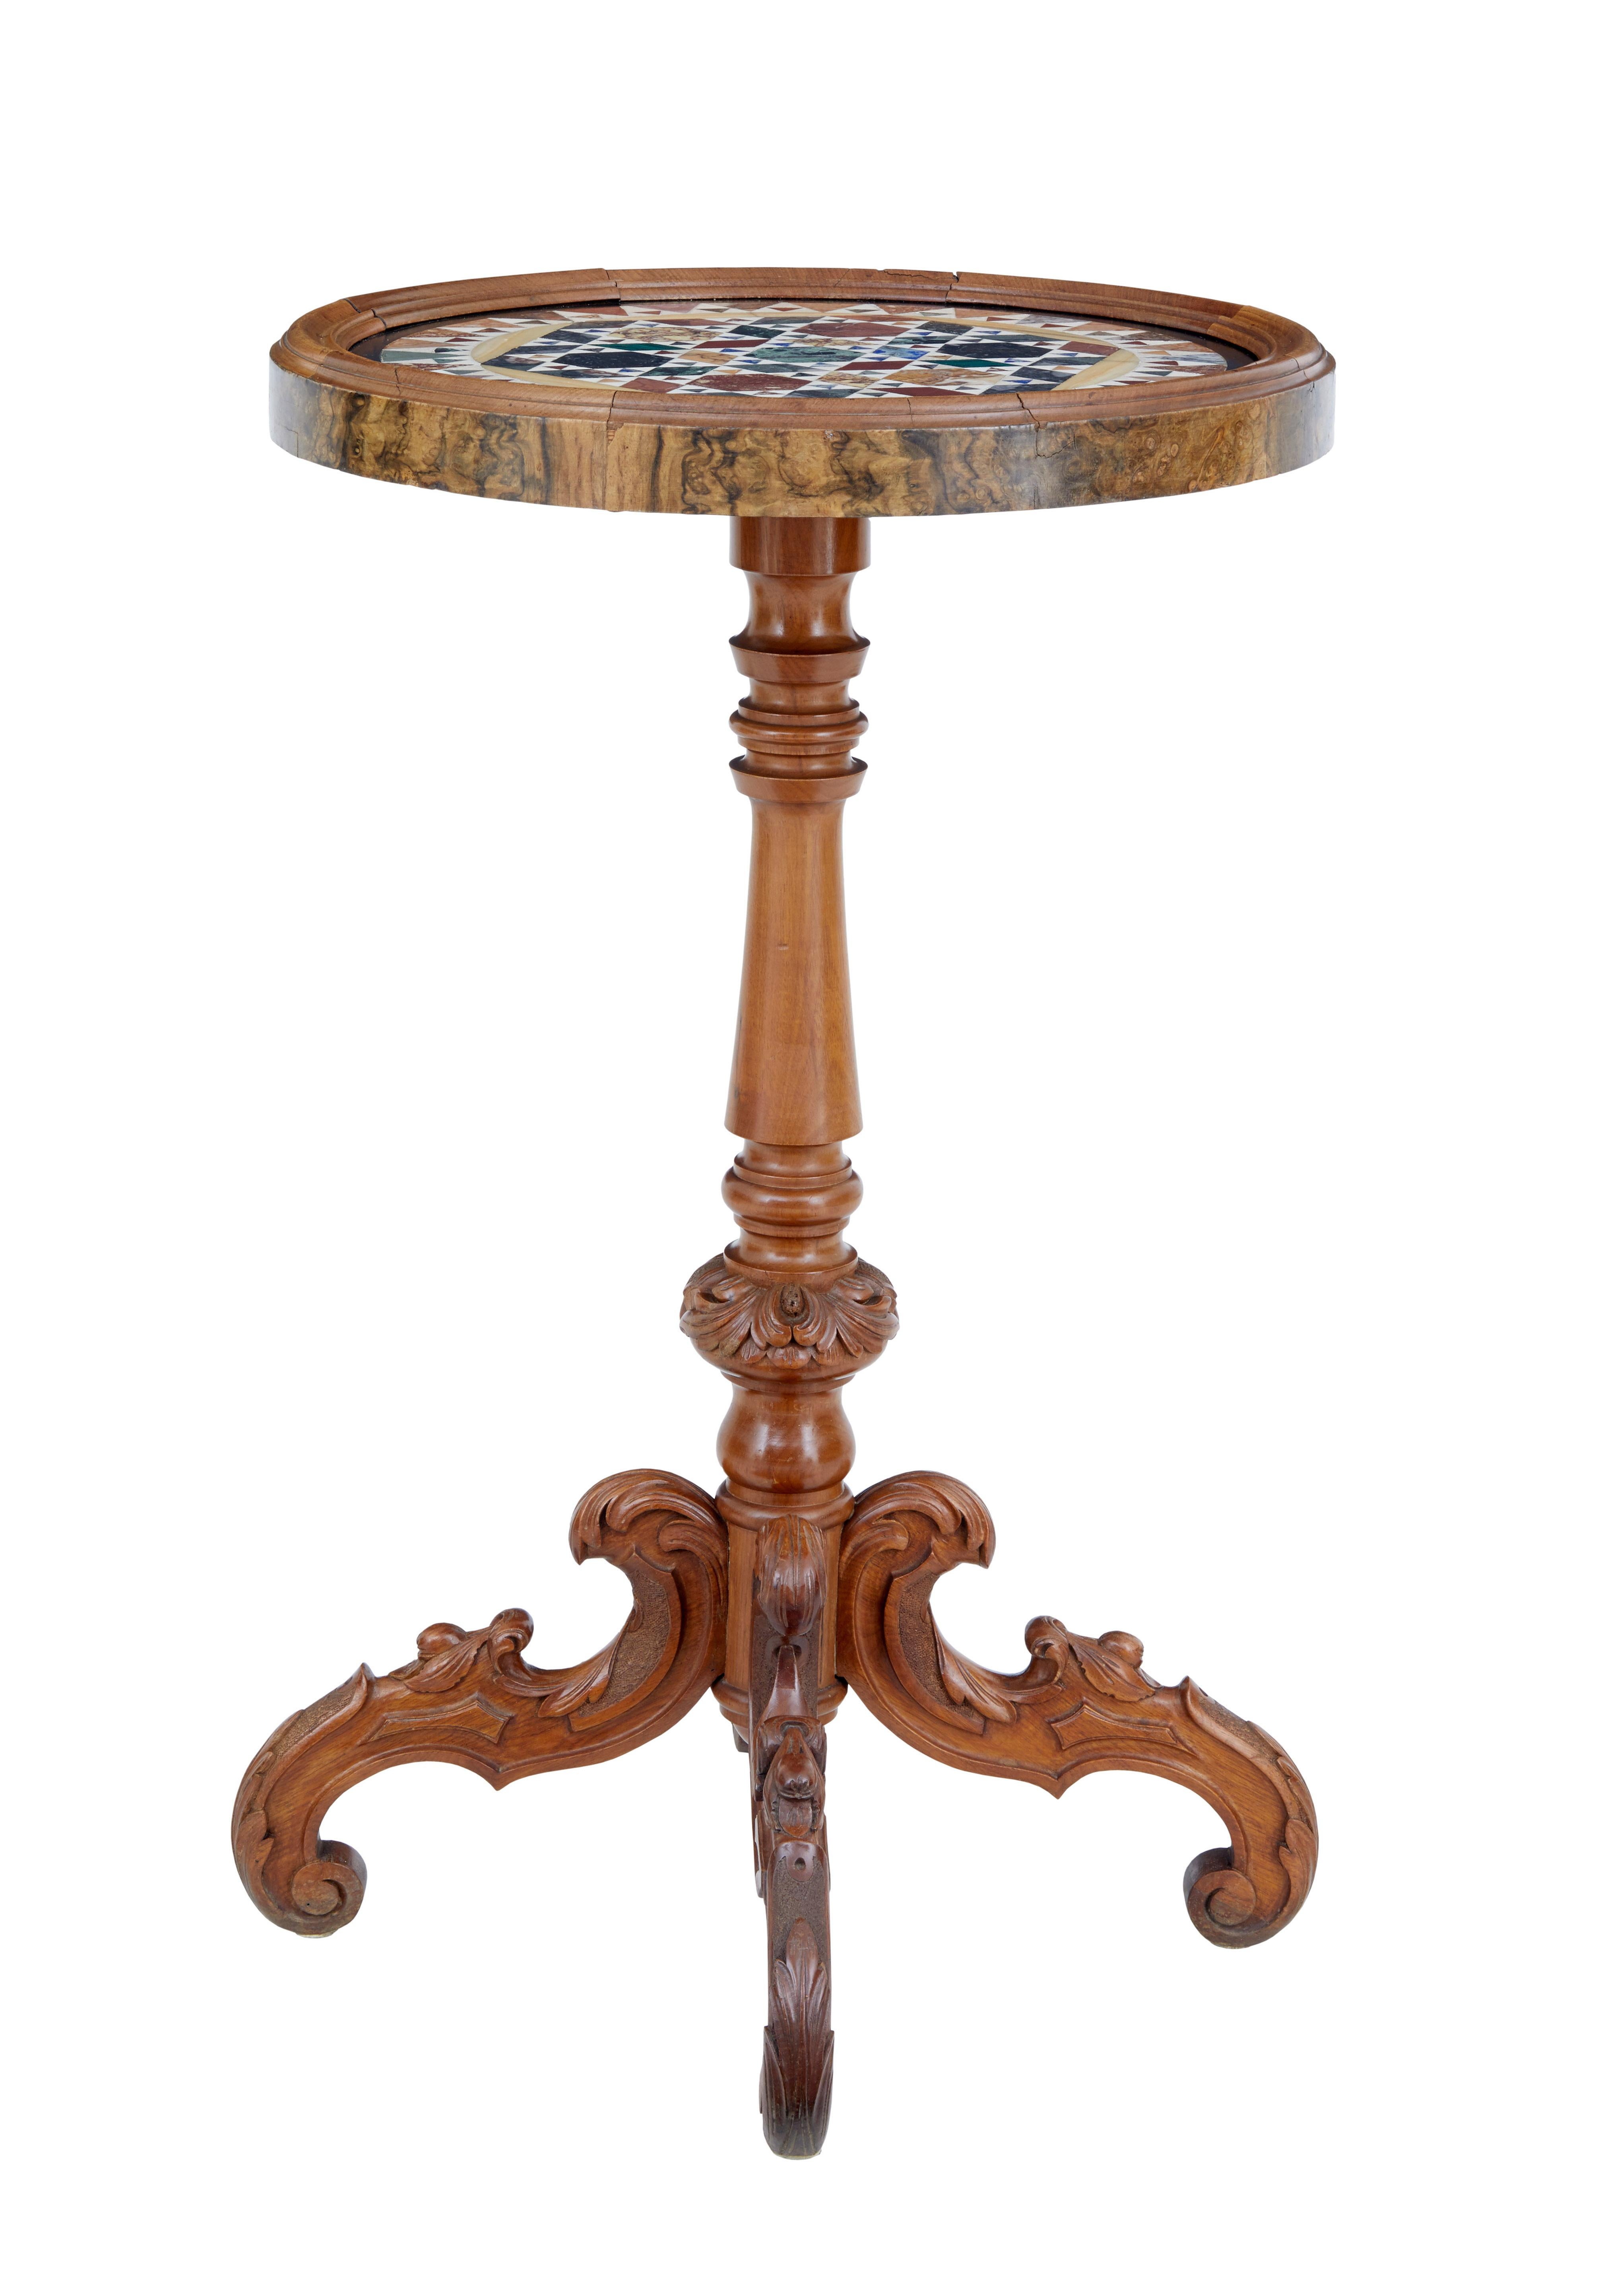 Good quality Pietra Dura specimen marble top table, circa 1880.

Beautiful circular marble top showcasing various samples of colored marble into a symmetrical pattern, secured in place by a walnut slip with burr veneer around the outer